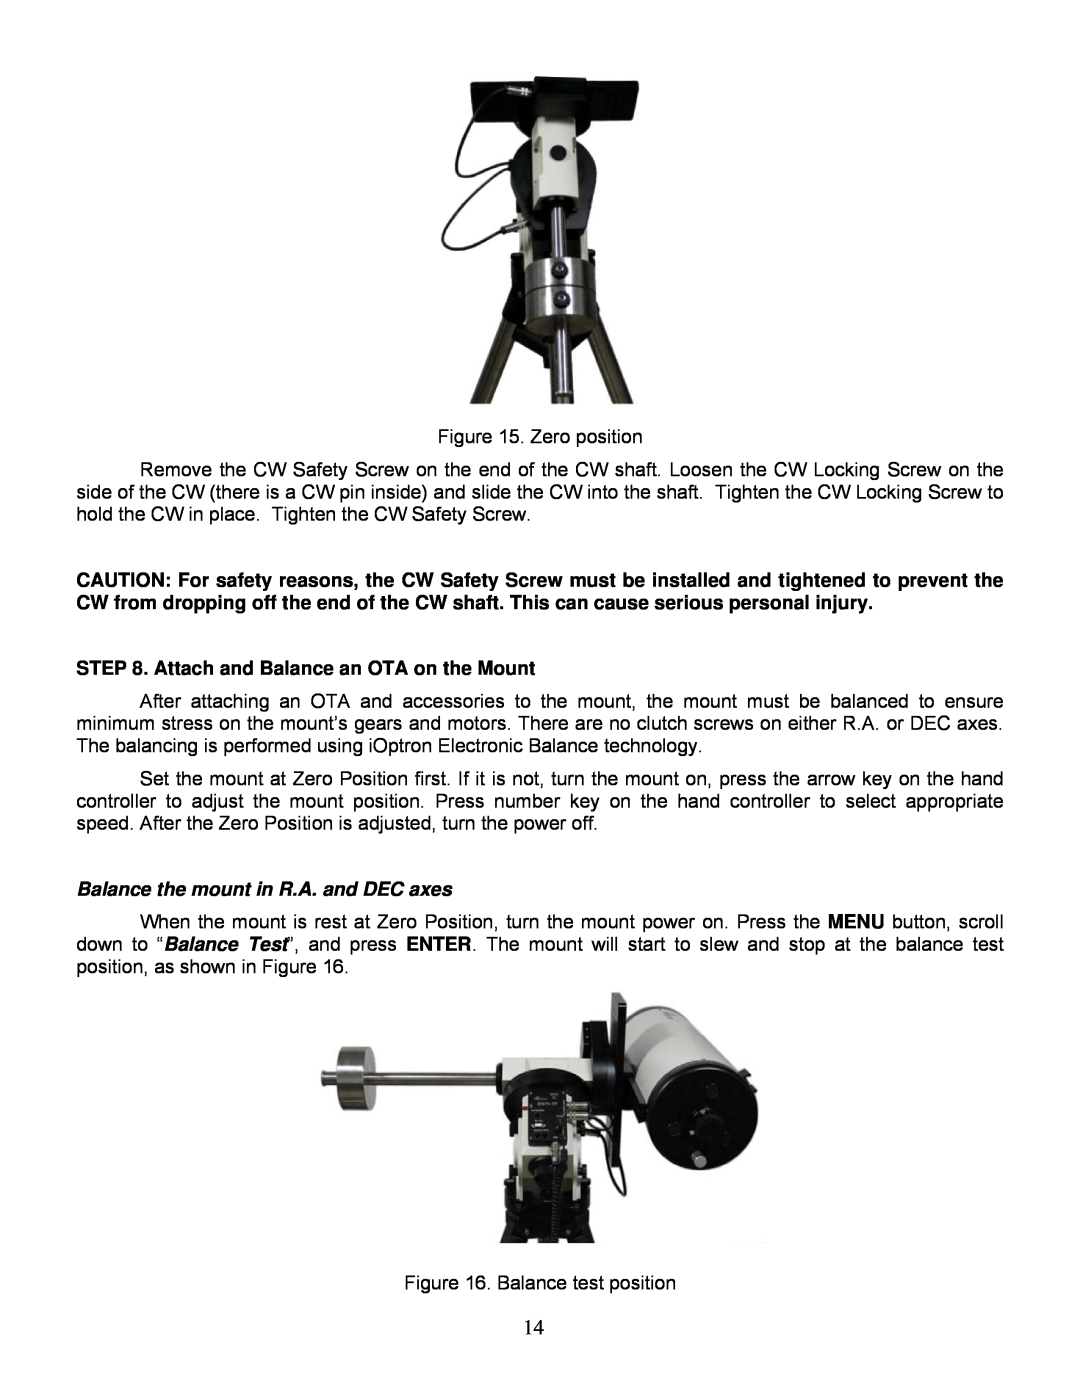 iOptron IEQ75-GTTM instruction manual Attach and Balance an OTA on the Mount, Balance the mount in R.A. and DEC axes 